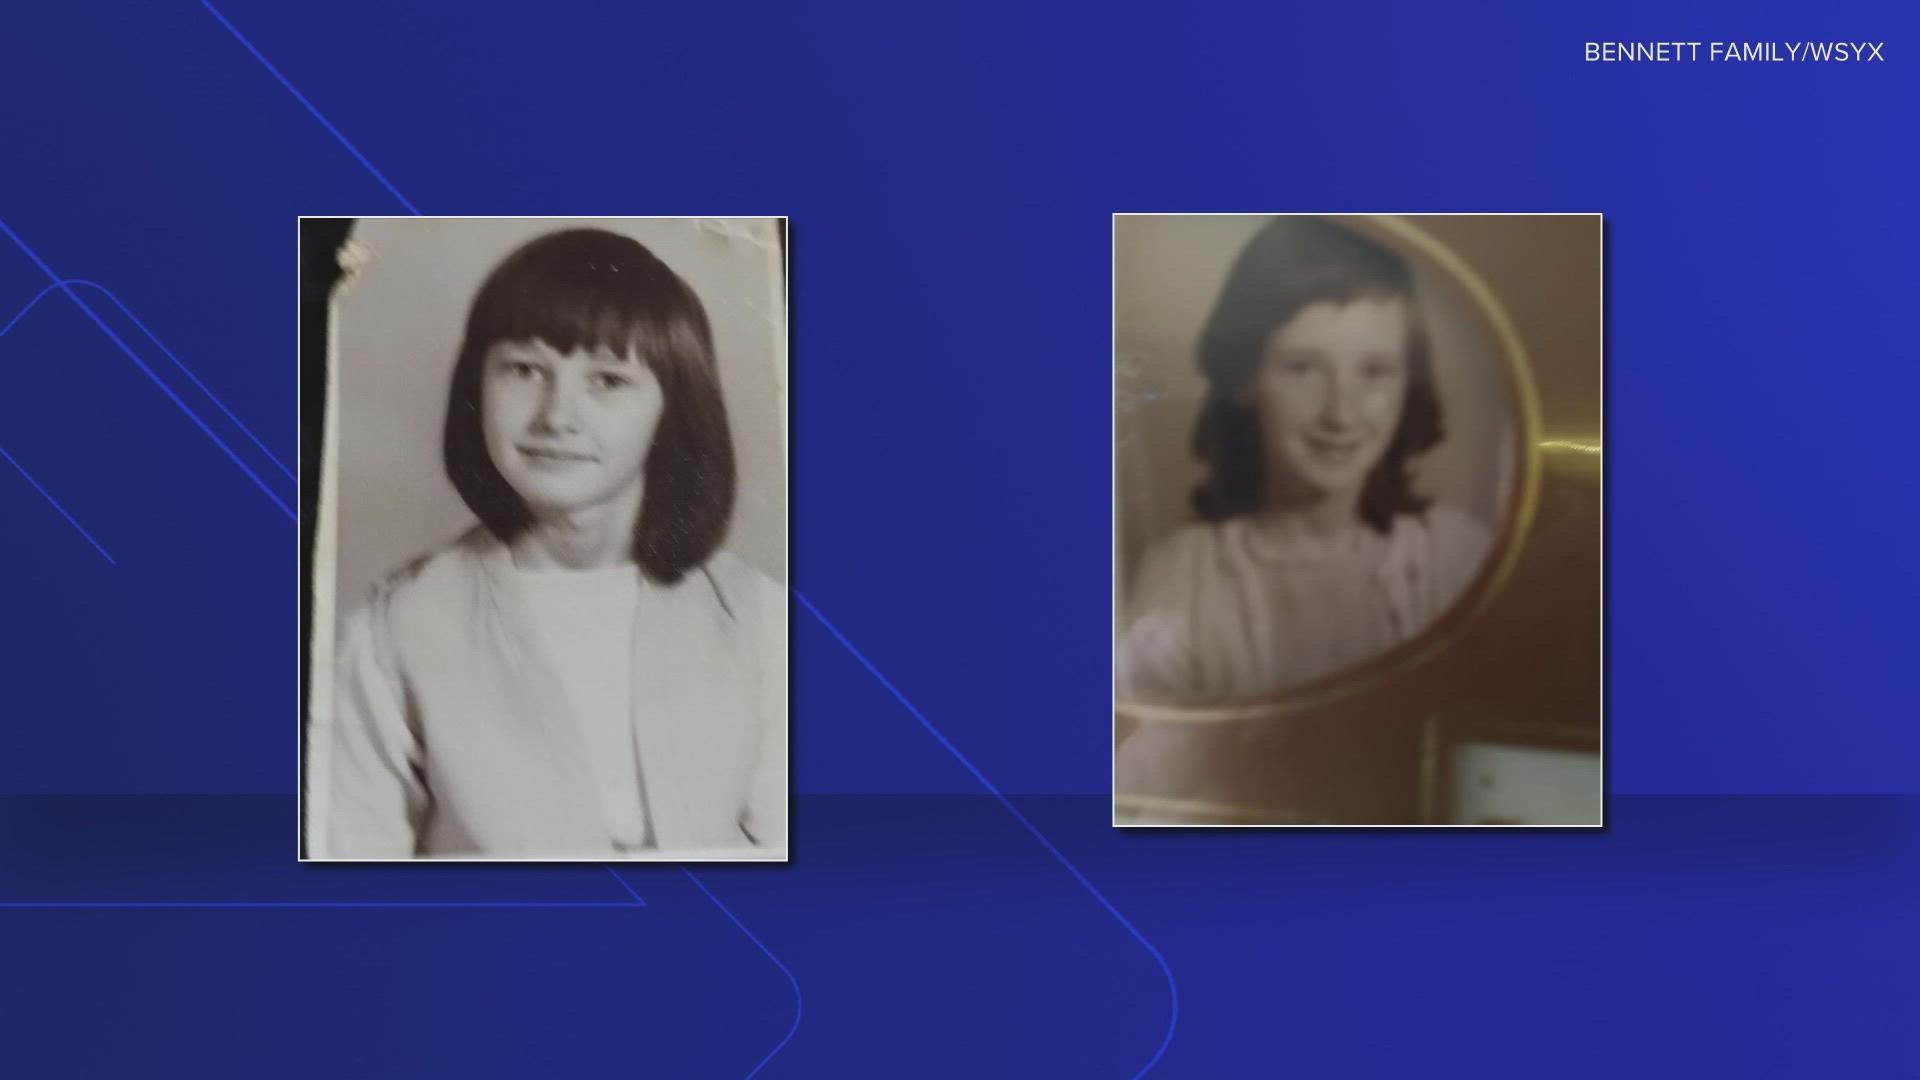 Thirty-four years after her body was found in Owen County, Kentucky, authorities say the victim has been identified as Linda Bennett of Columbus, Ohio.